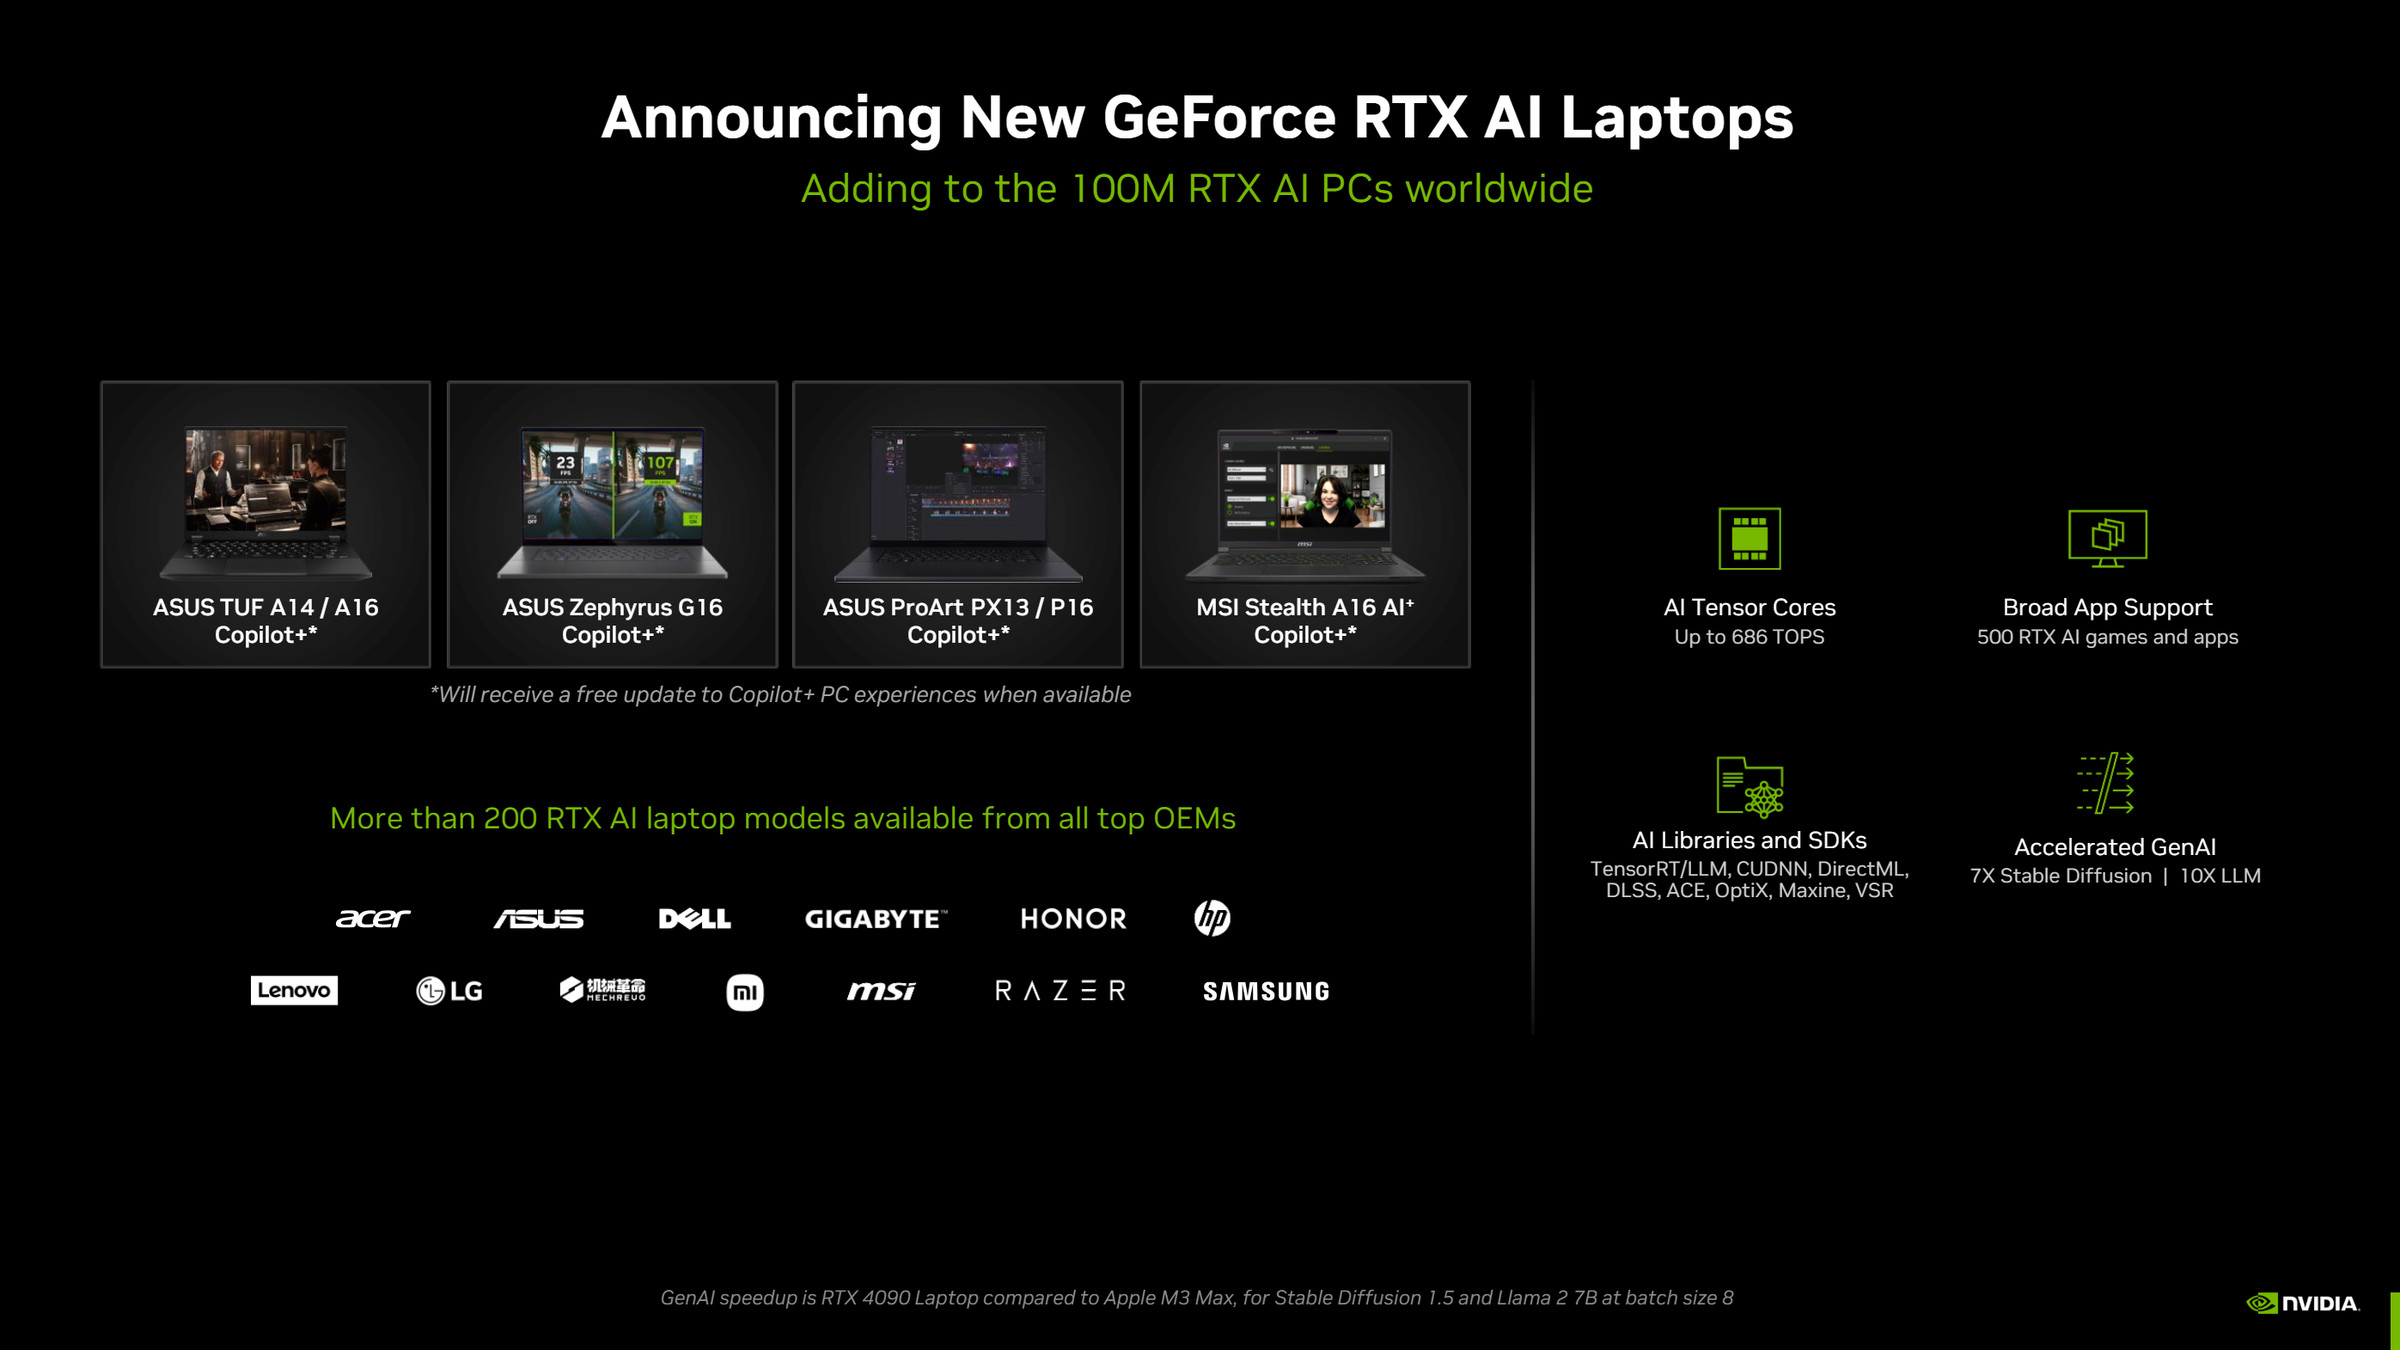 Nvidias RTX AI laptops with Copilot Plus features are coming soon